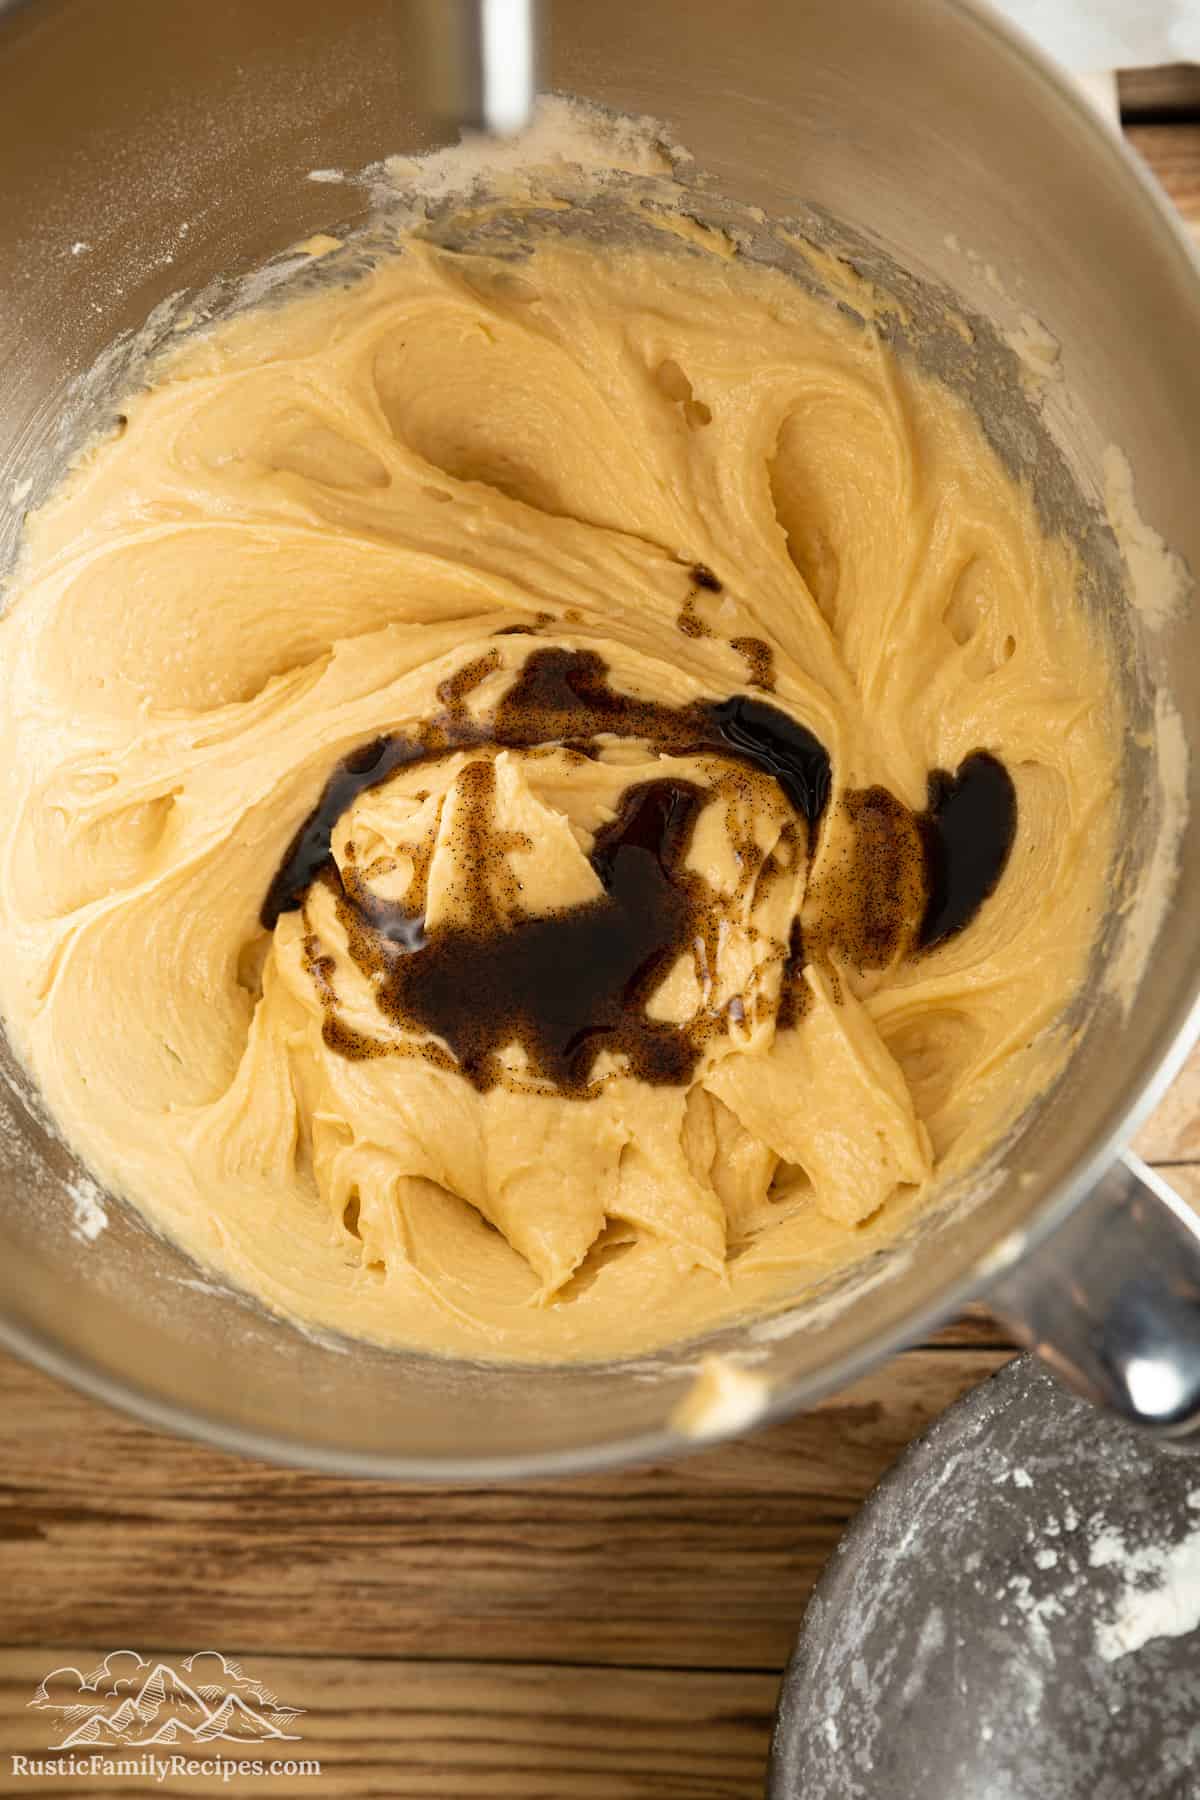 Vanilla is added into cake batter in the bowl of a stand mixer.